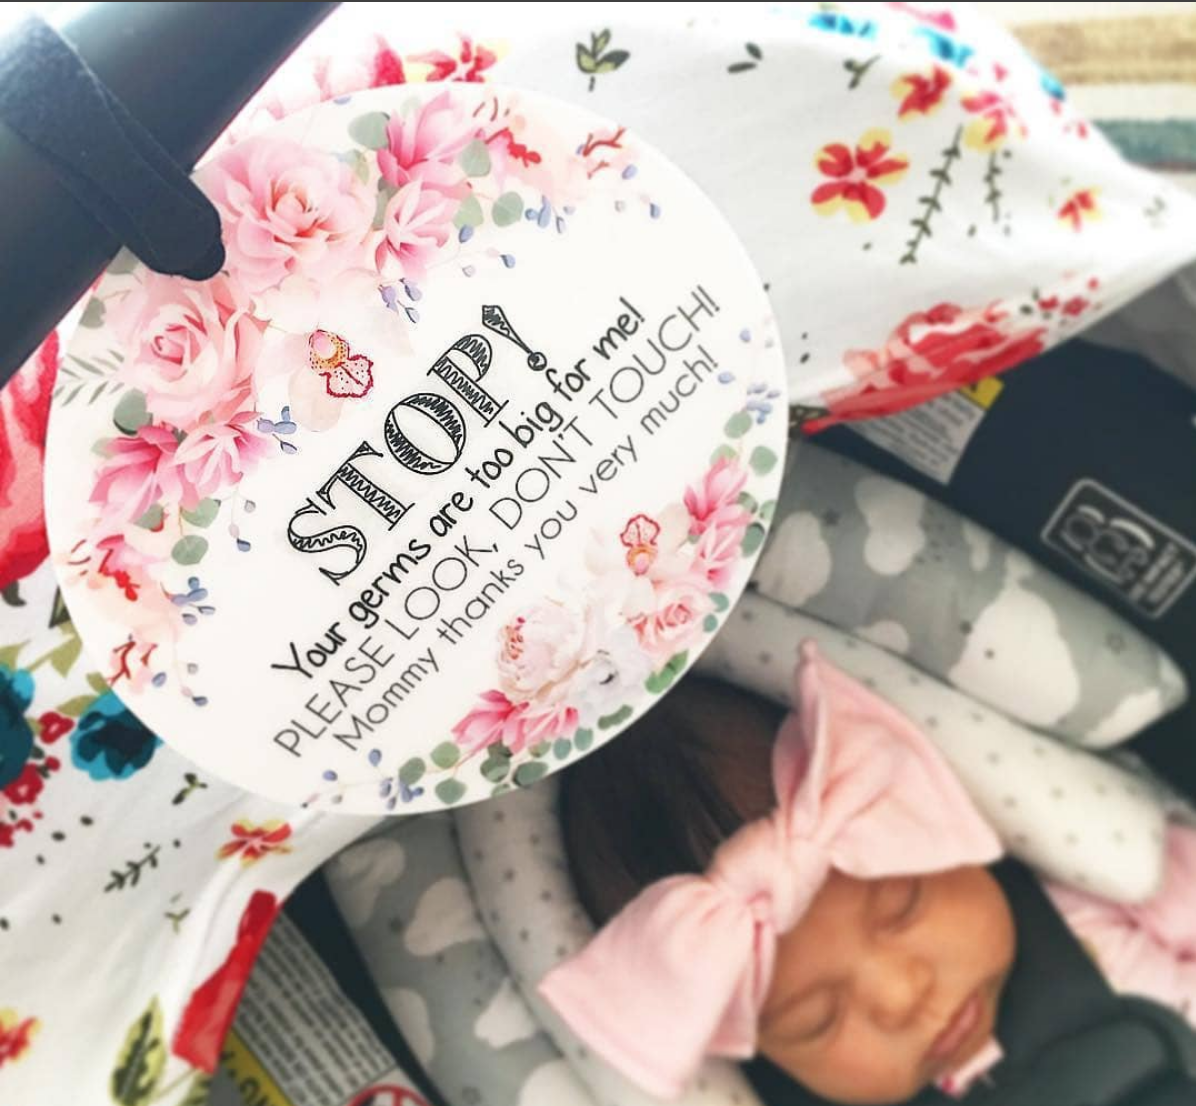 Just born little girl in her car seat with a flower no touching baby sign